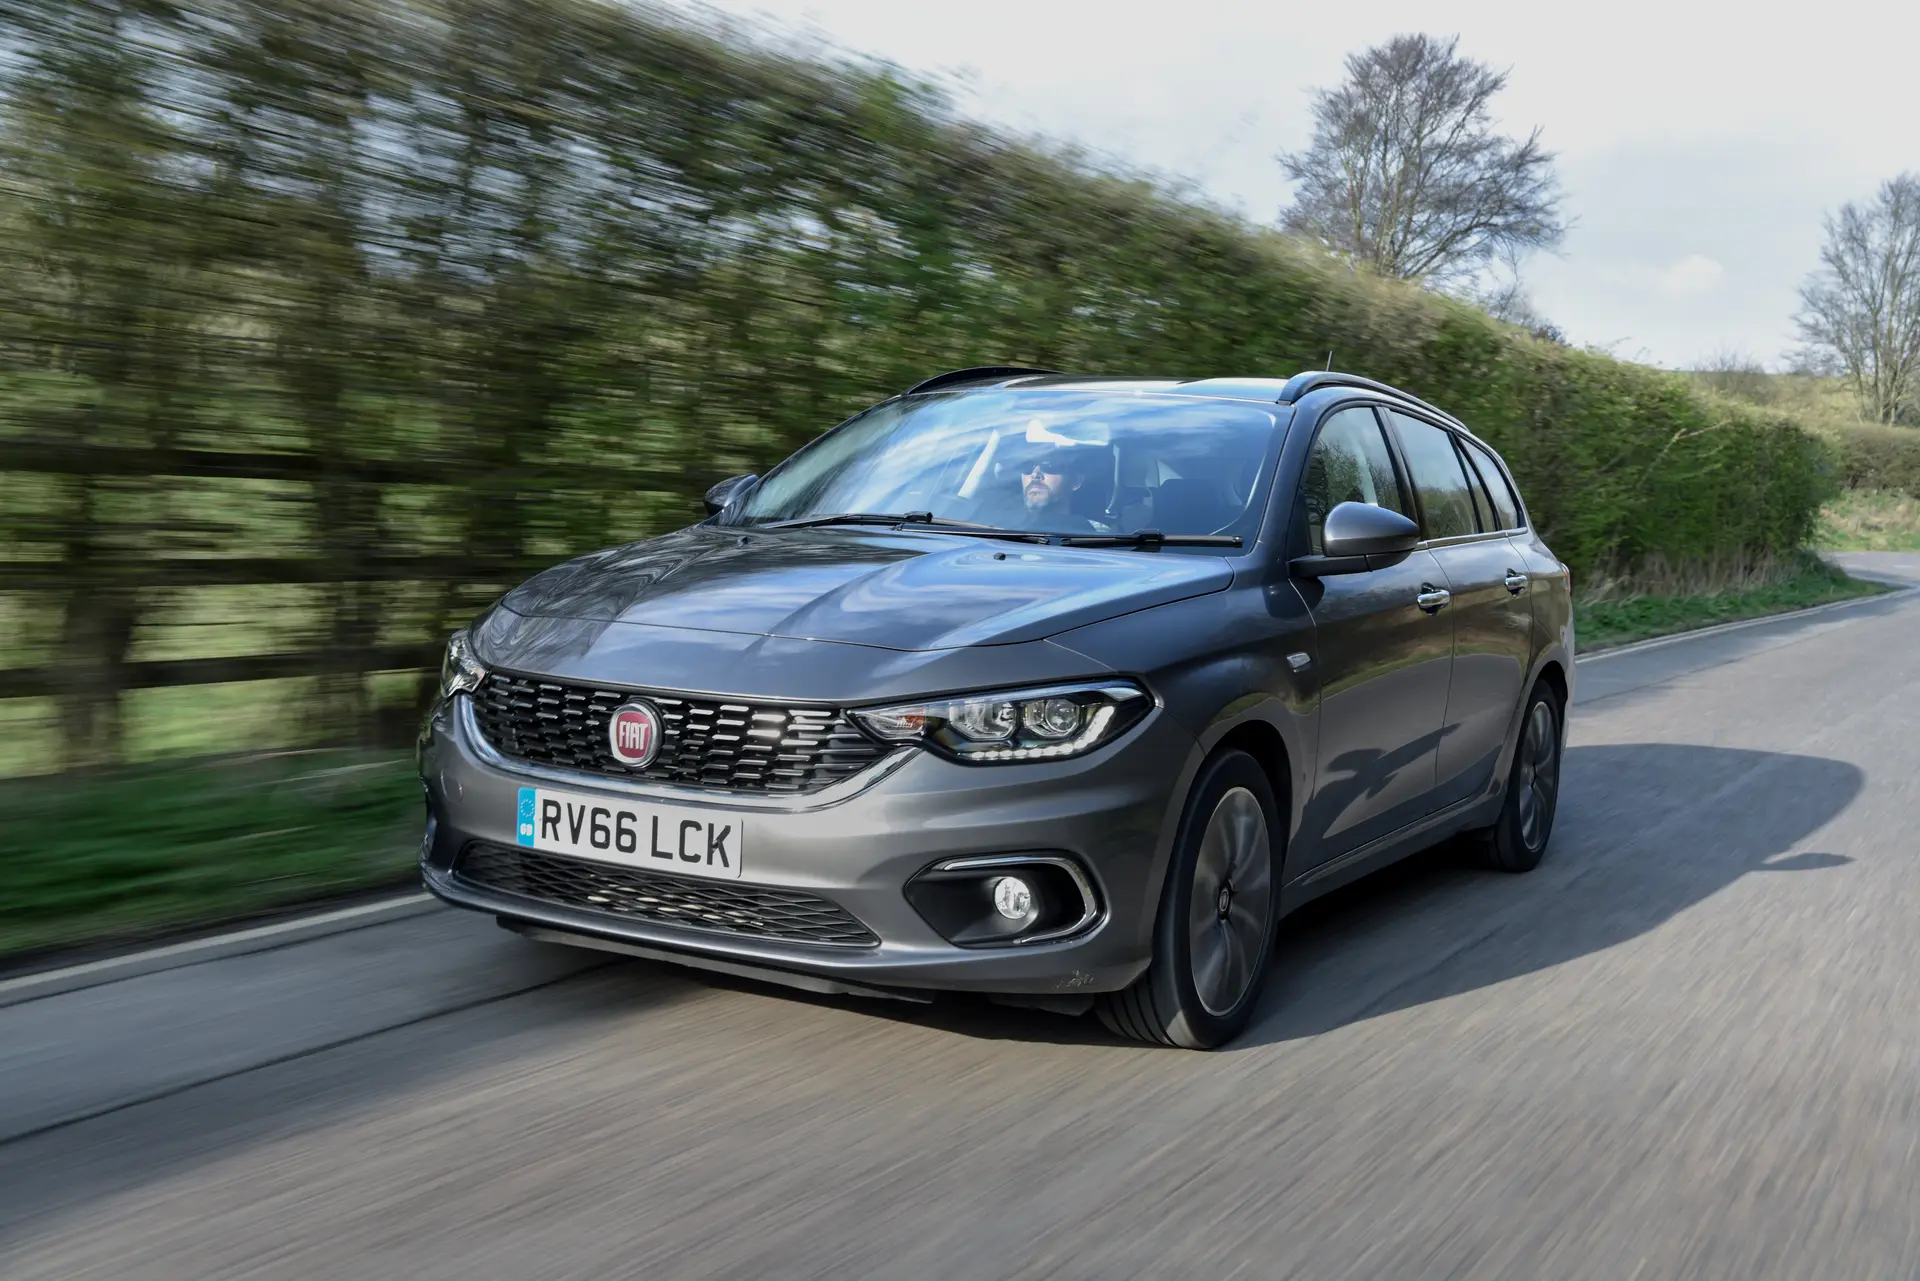 Fiat Tipo Station Wagon (2016-2021) Review: SW driving